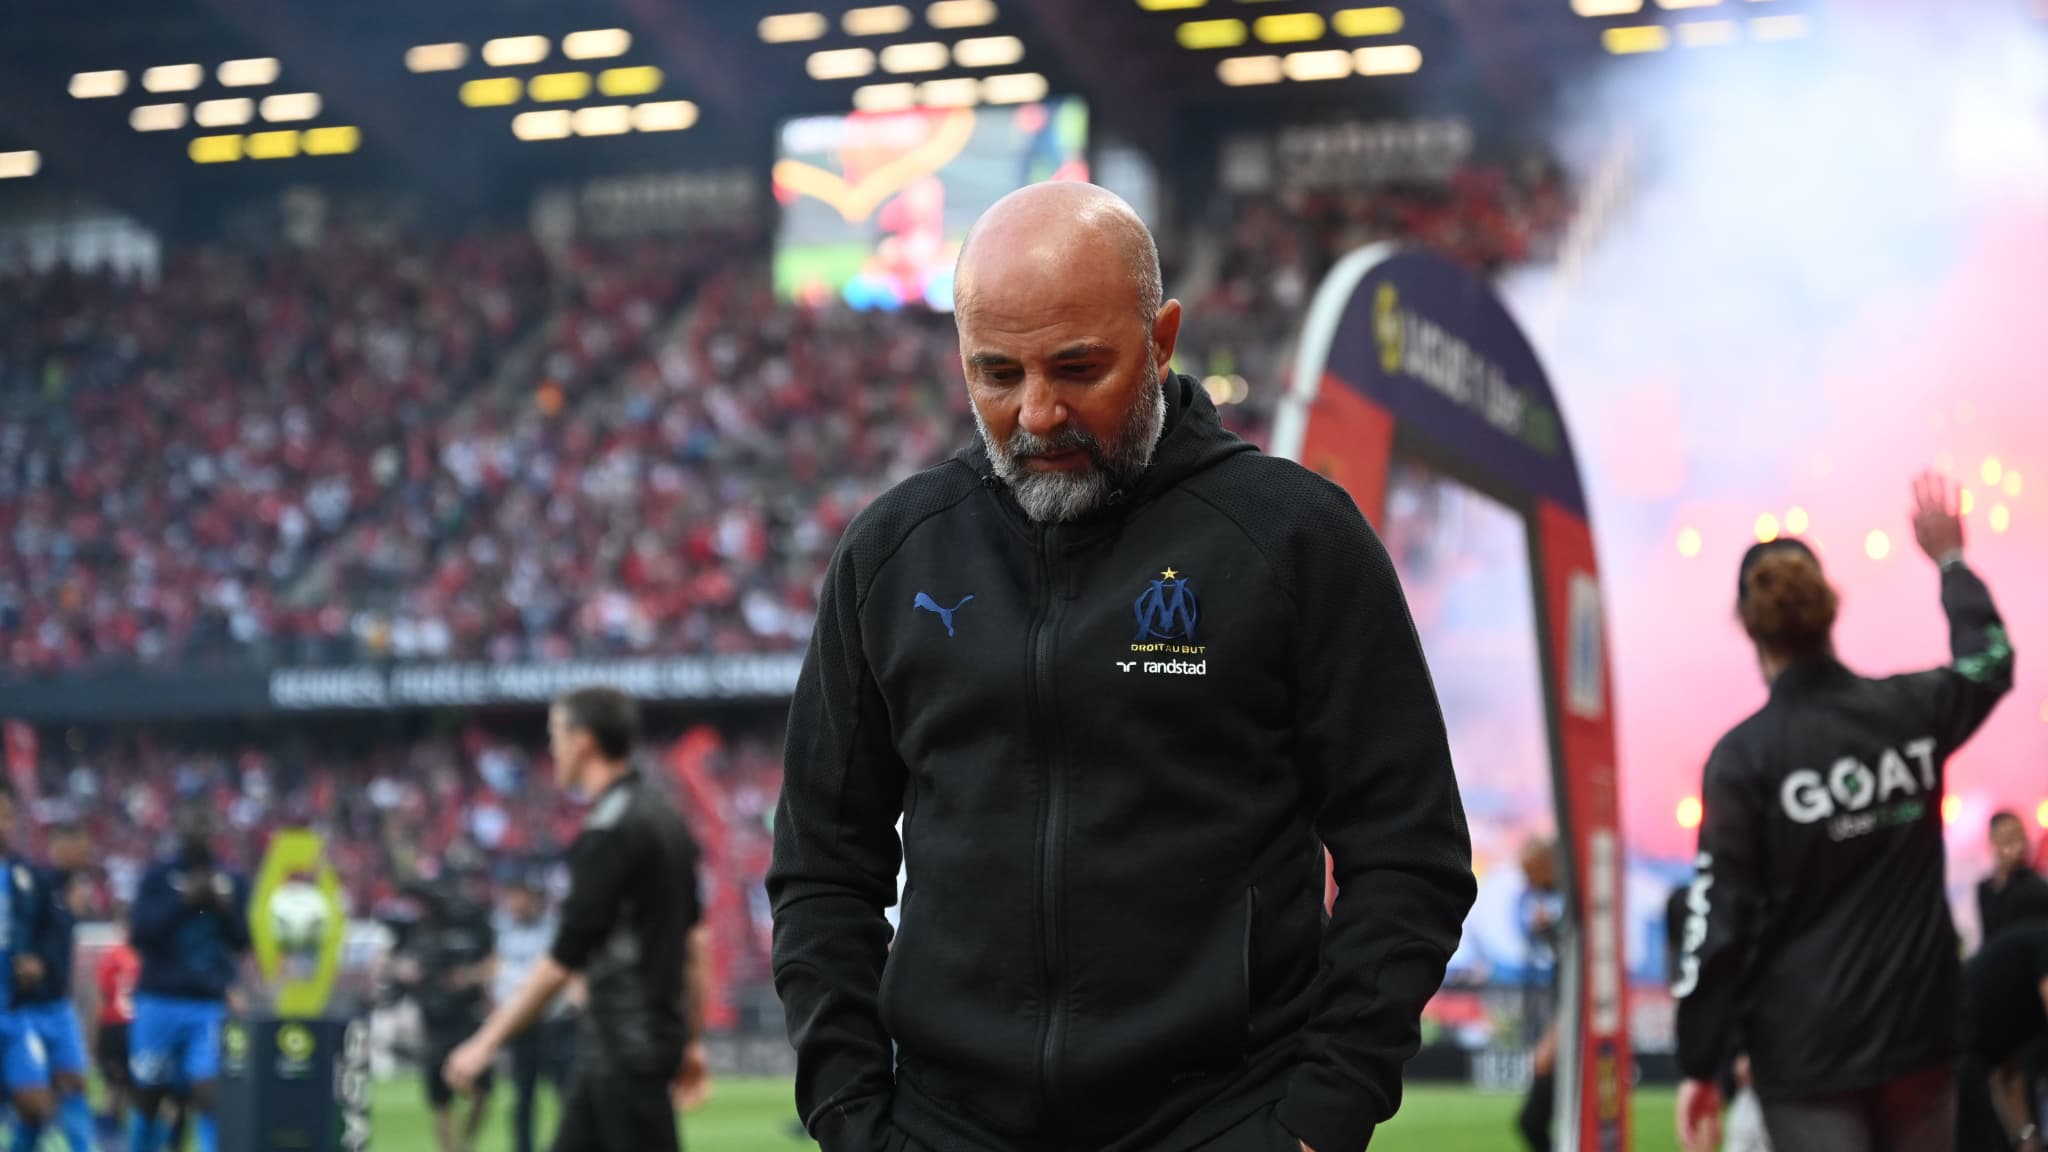 Thunder bombed, Sampaoli submitted his resignation